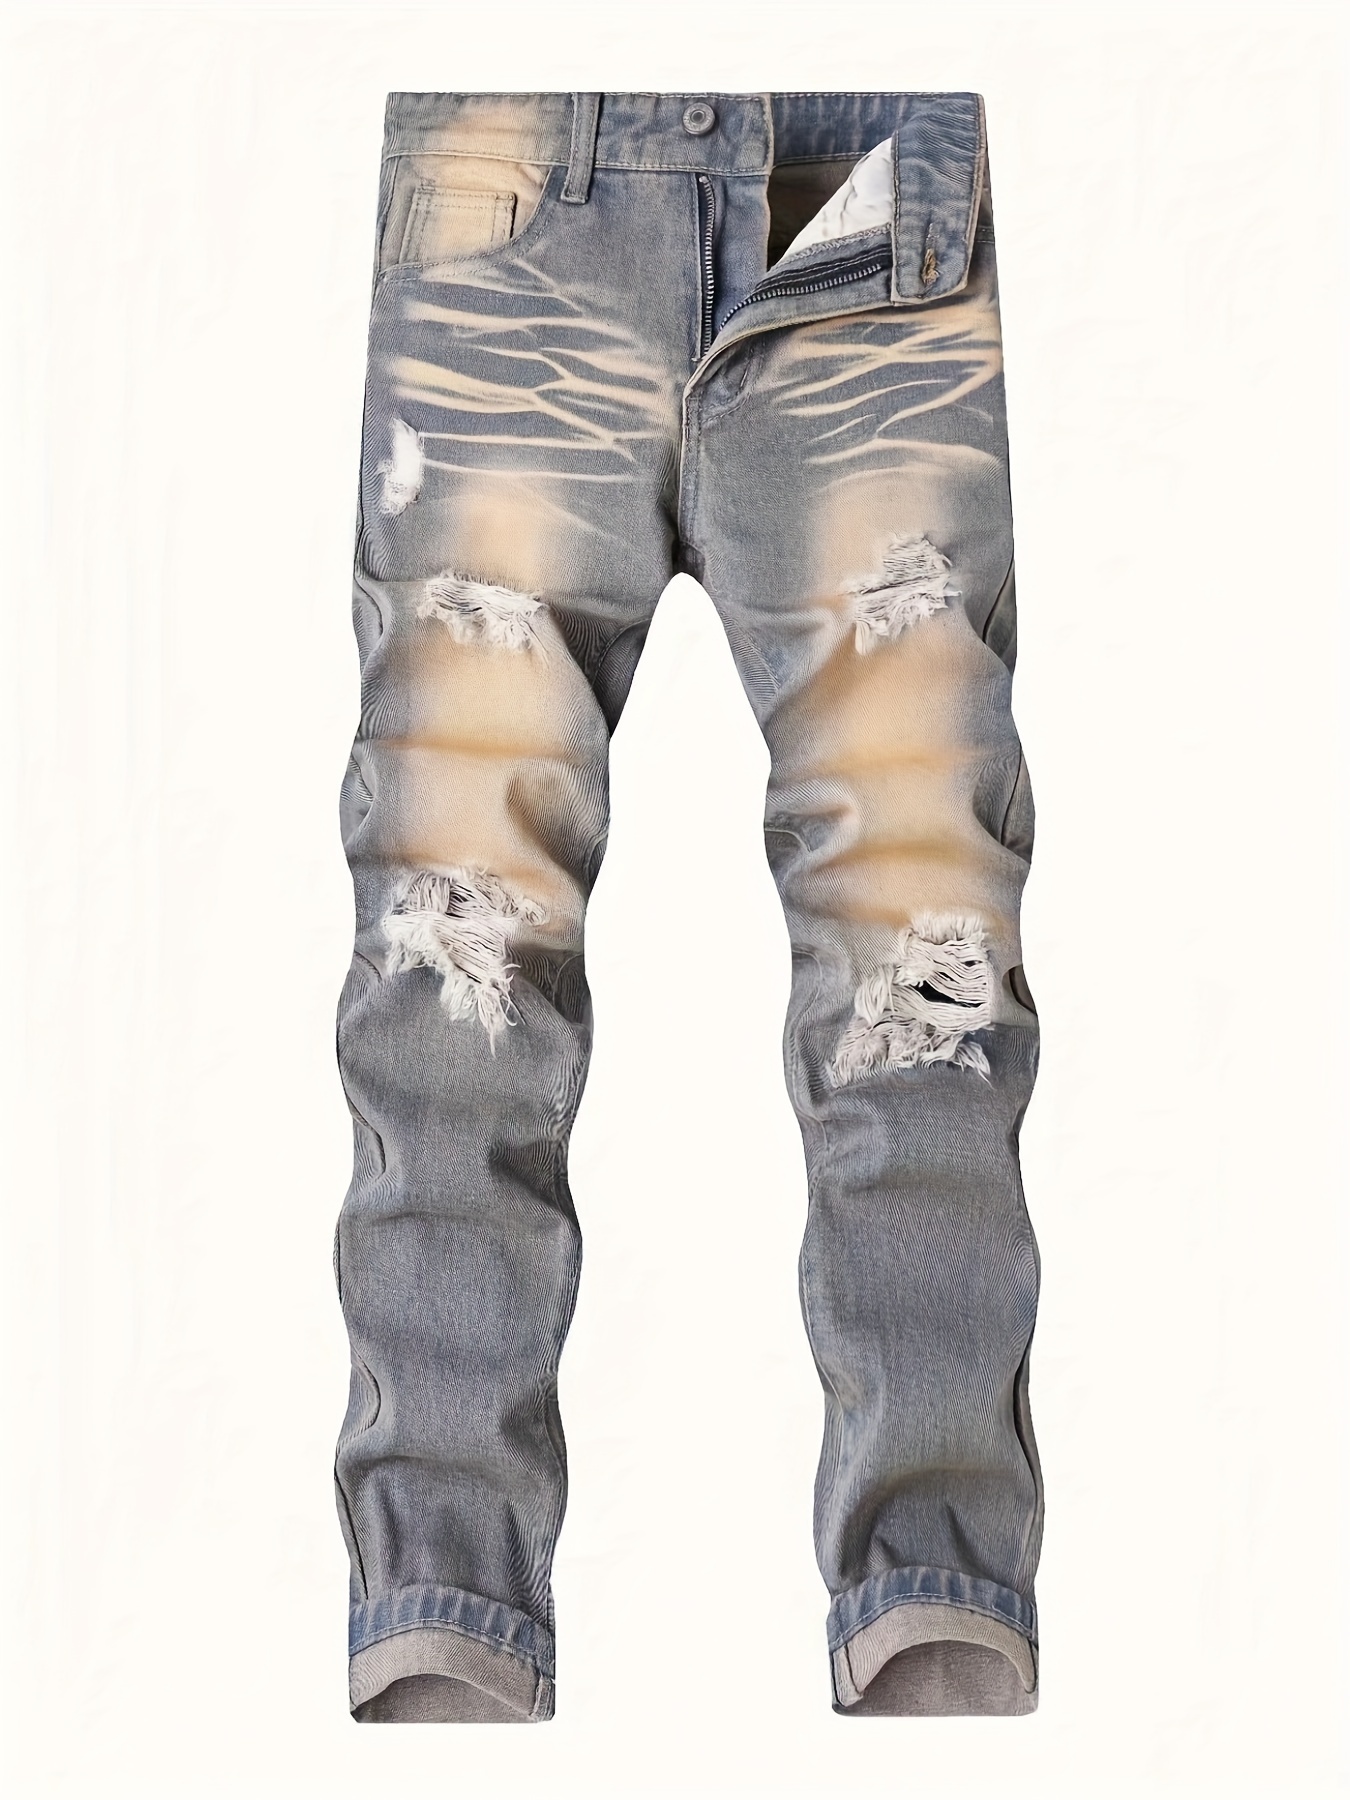 Kid's Skeleton Print Jeans, Denim Pants With Pockets, Boy's Novelty Clothes  For All Seasons